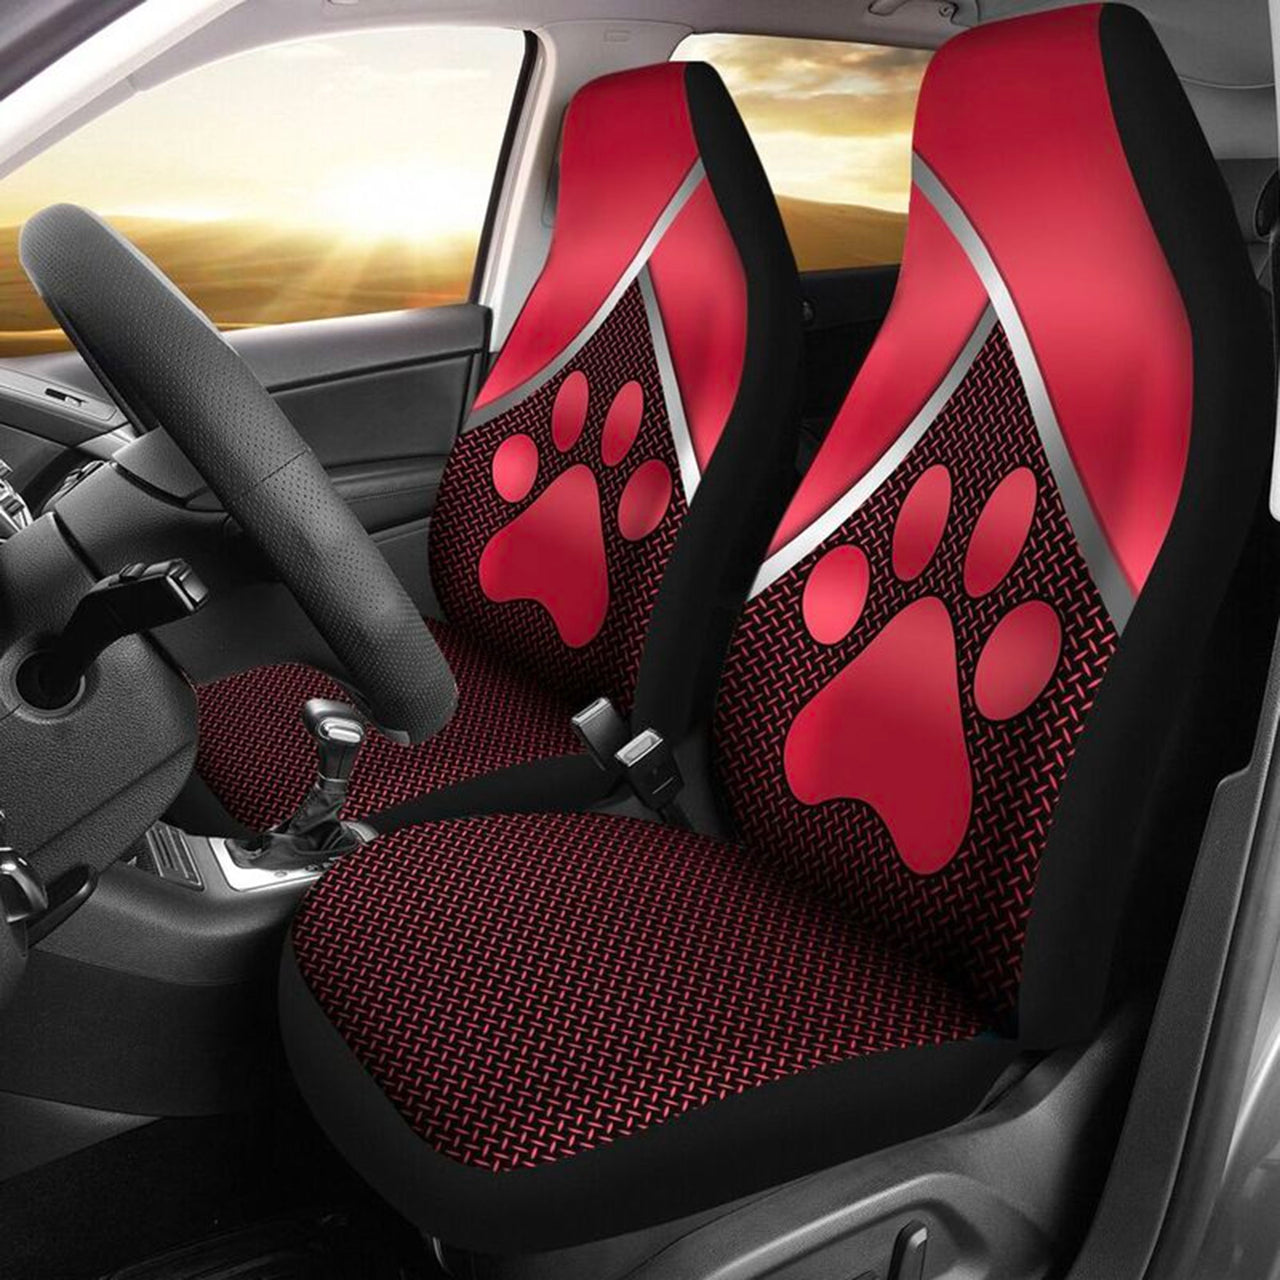 Custom Car Seat Cover Dog Paw Red 3D Silver Metal Seat Covers for Cars